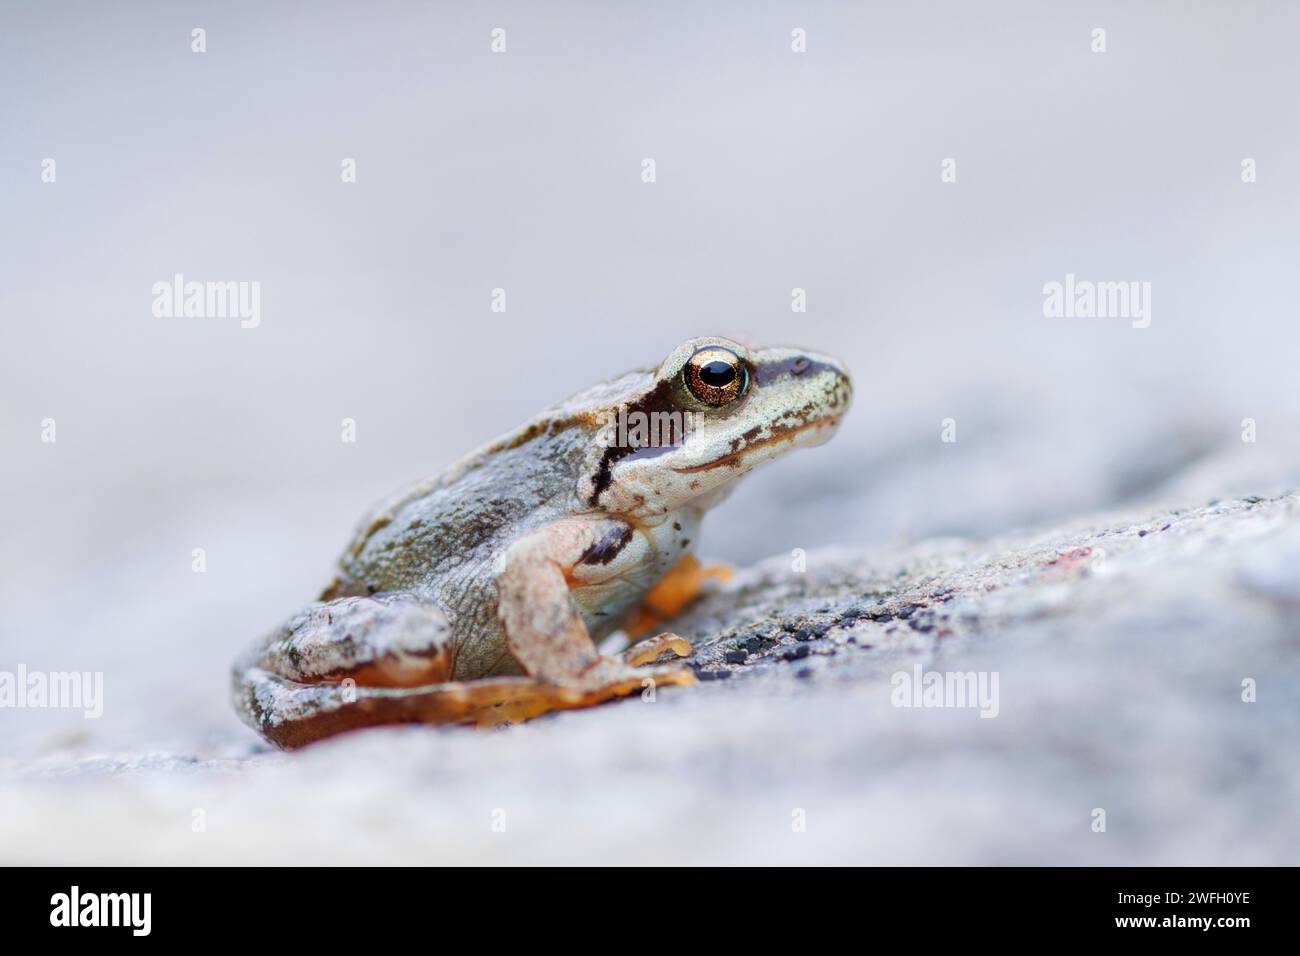 common frog, grass frog (Rana temporaria), sitting on a rock, France Stock Photo